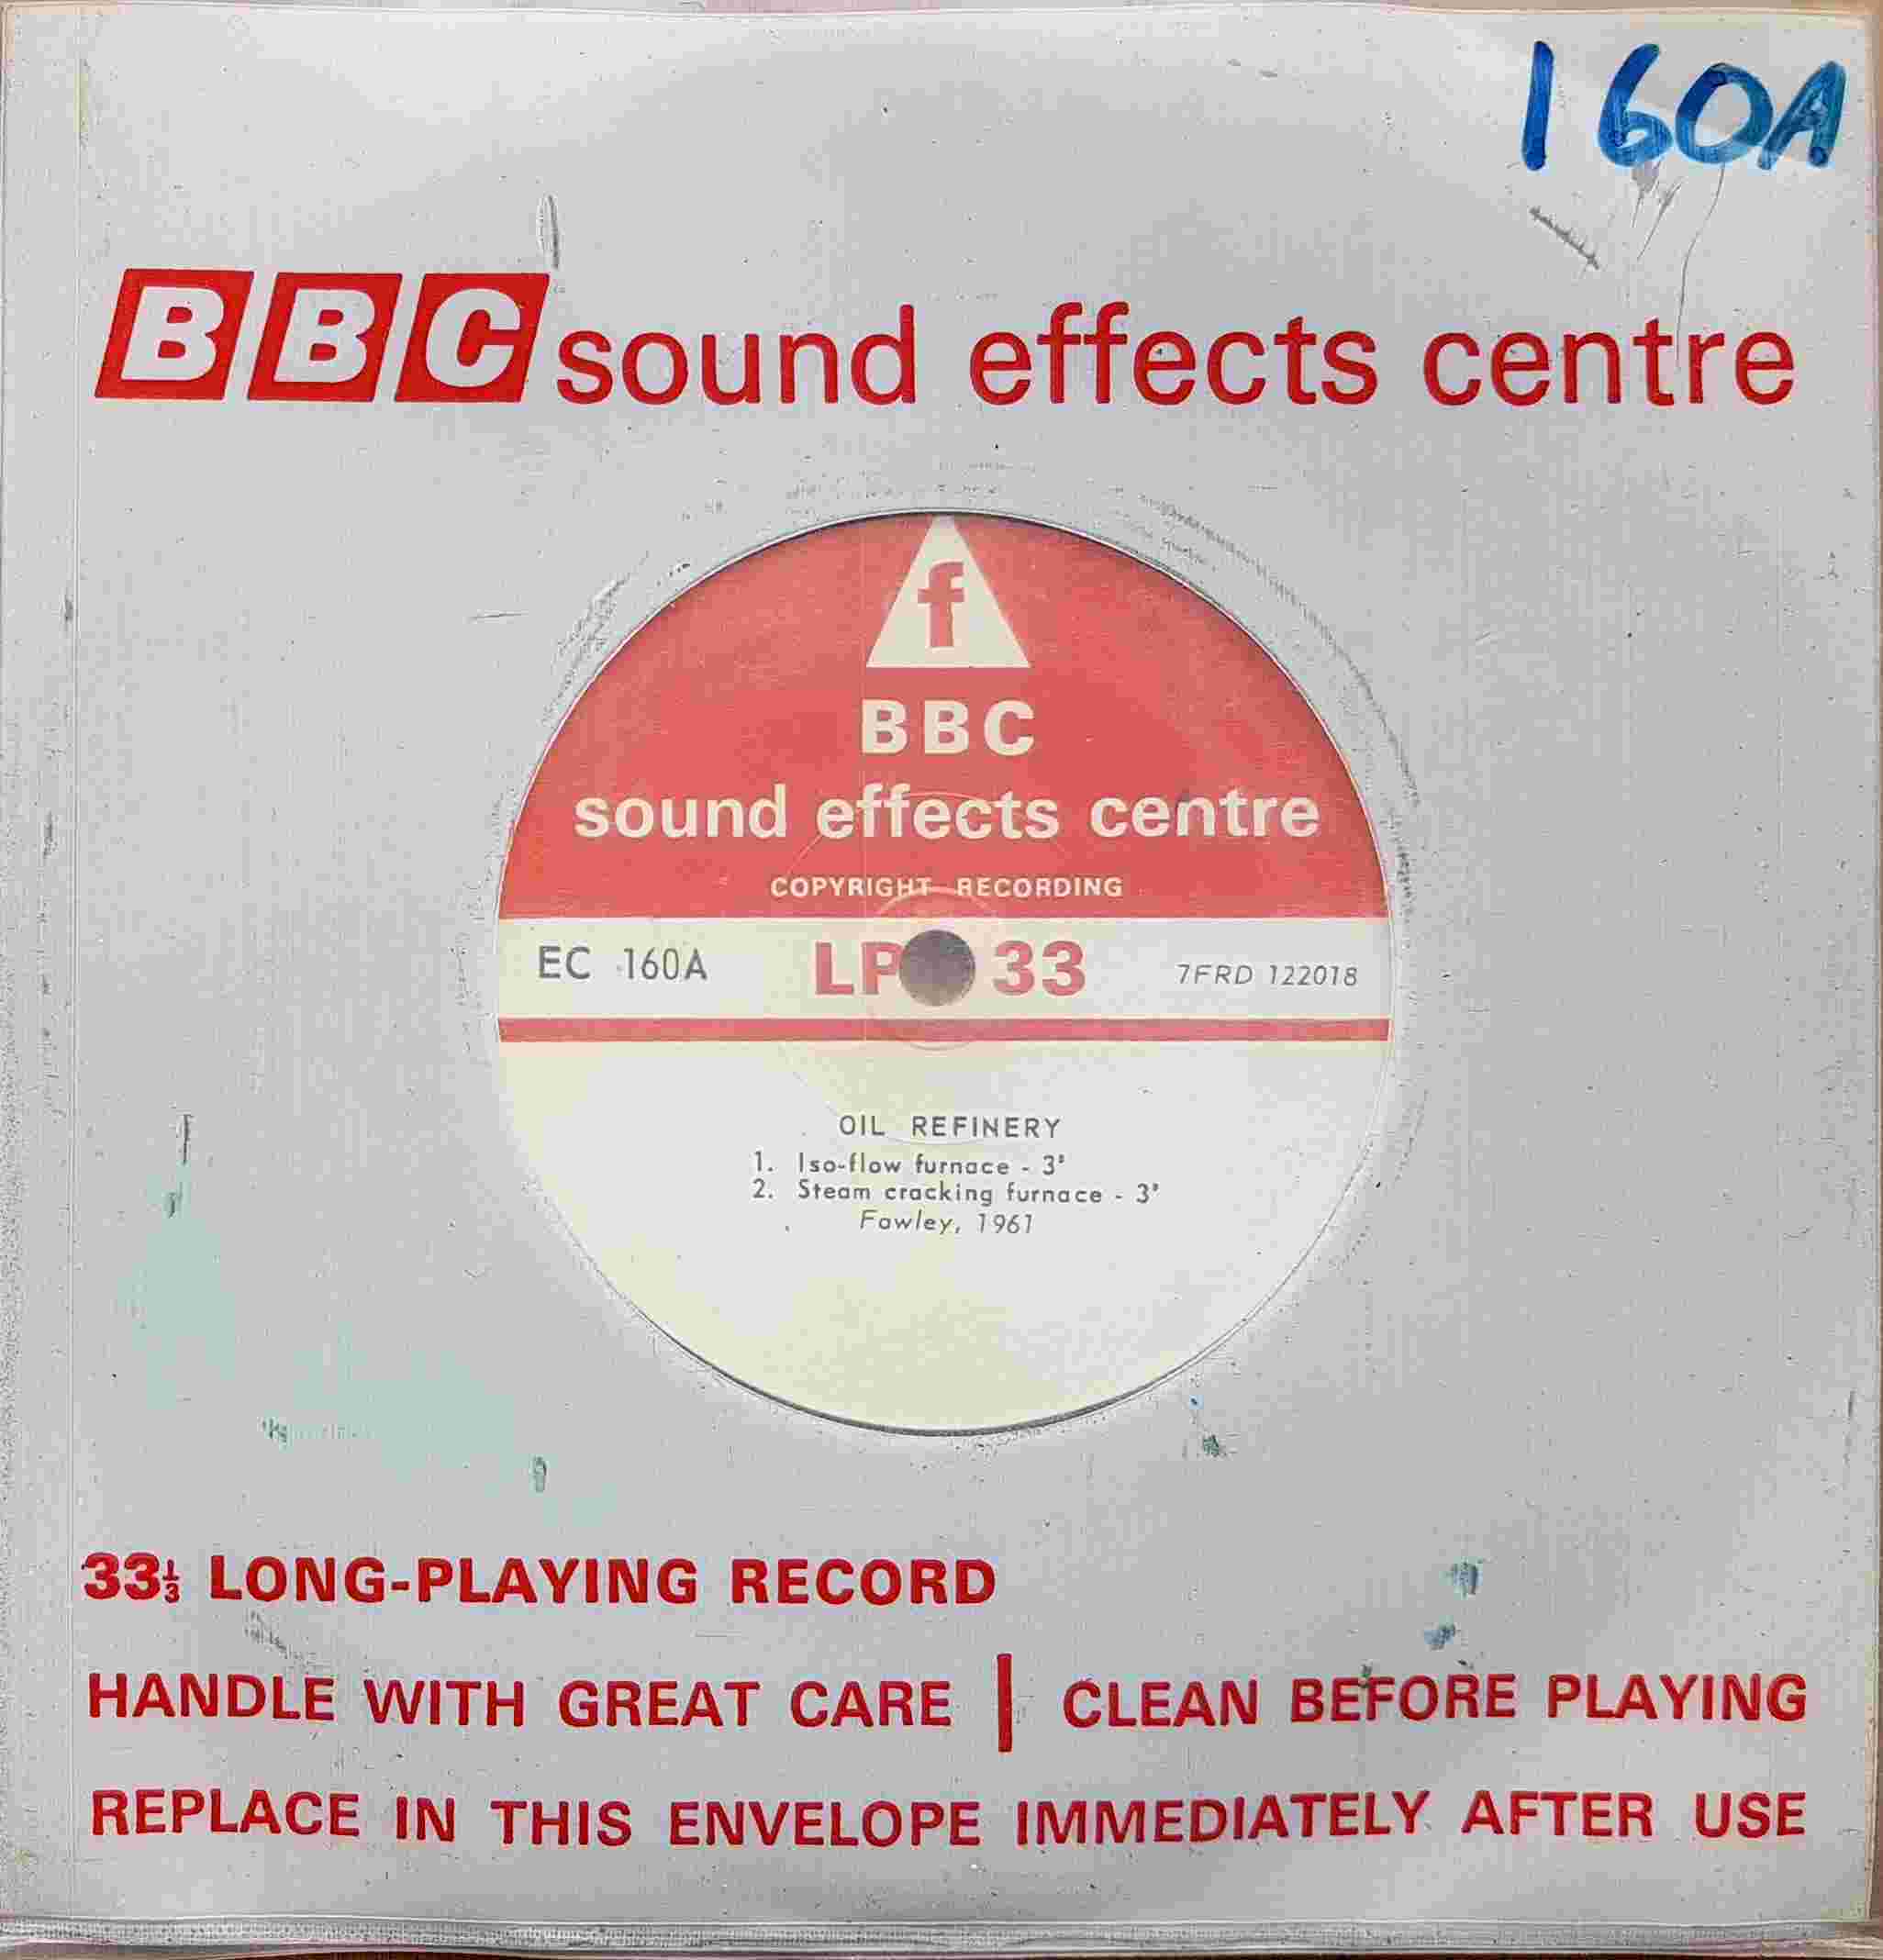 Picture of EC 160A Oil refinery by artist Not registered from the BBC singles - Records and Tapes library